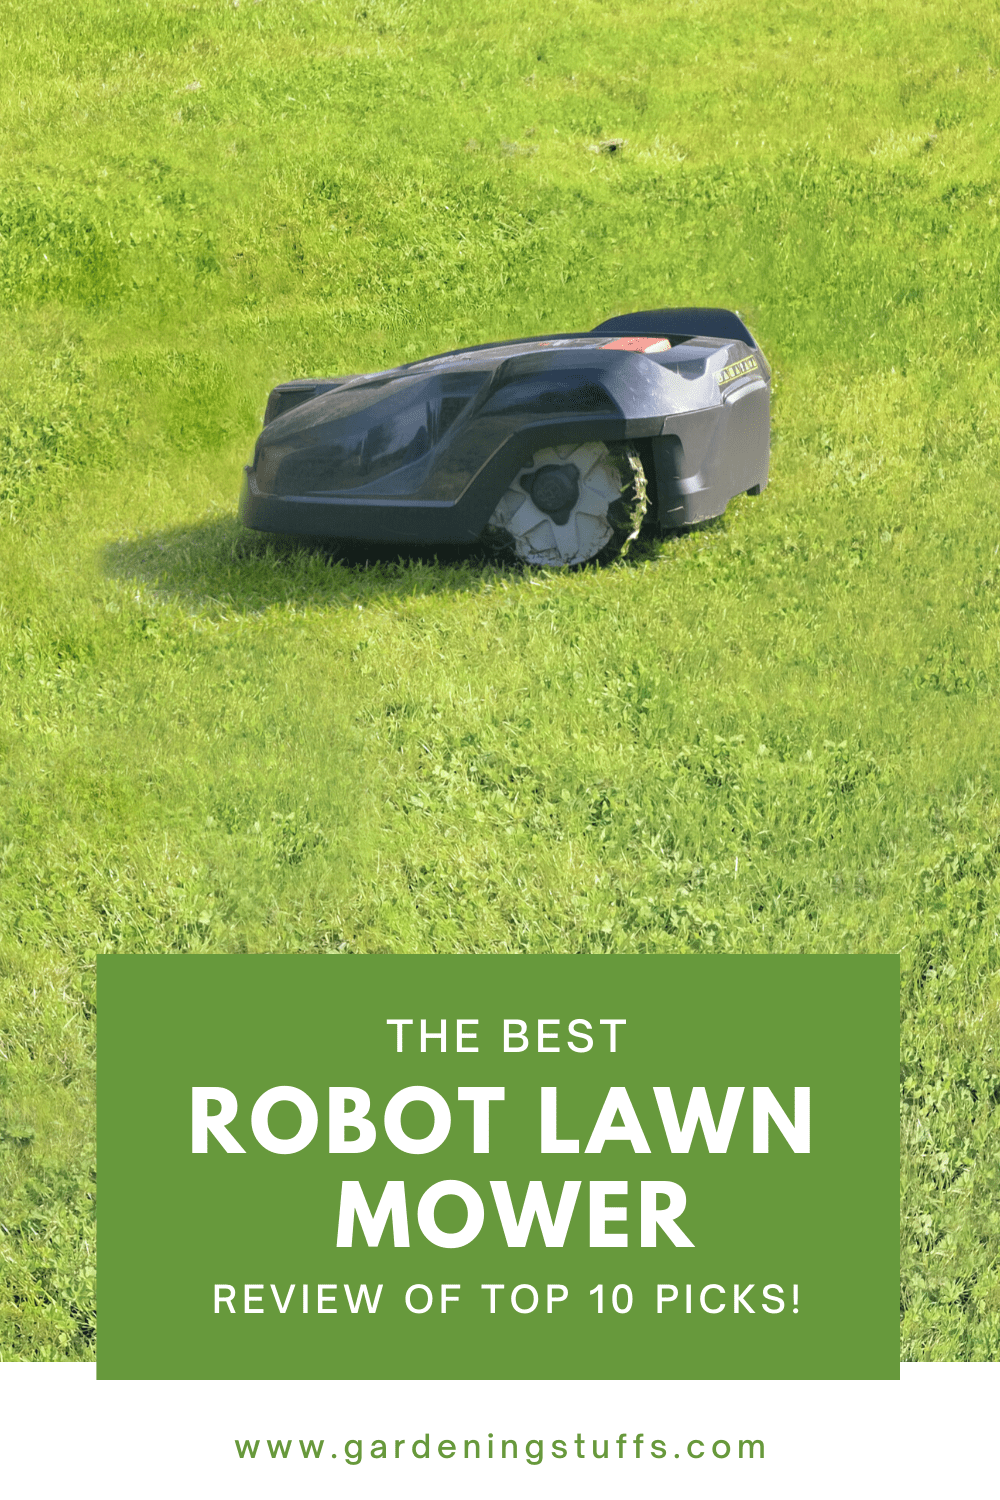 Keeping your lawn green, lush, and neatly trimmed can be quite a chore. But certainly not if you have a robotic lawn mower. We’ve reviewed 10 of the best robot lawn mowers to help you along your journey of finding not only the best but also the most suitable one for your lawn. Learn more about gardening tips @ #GardeningStuffs